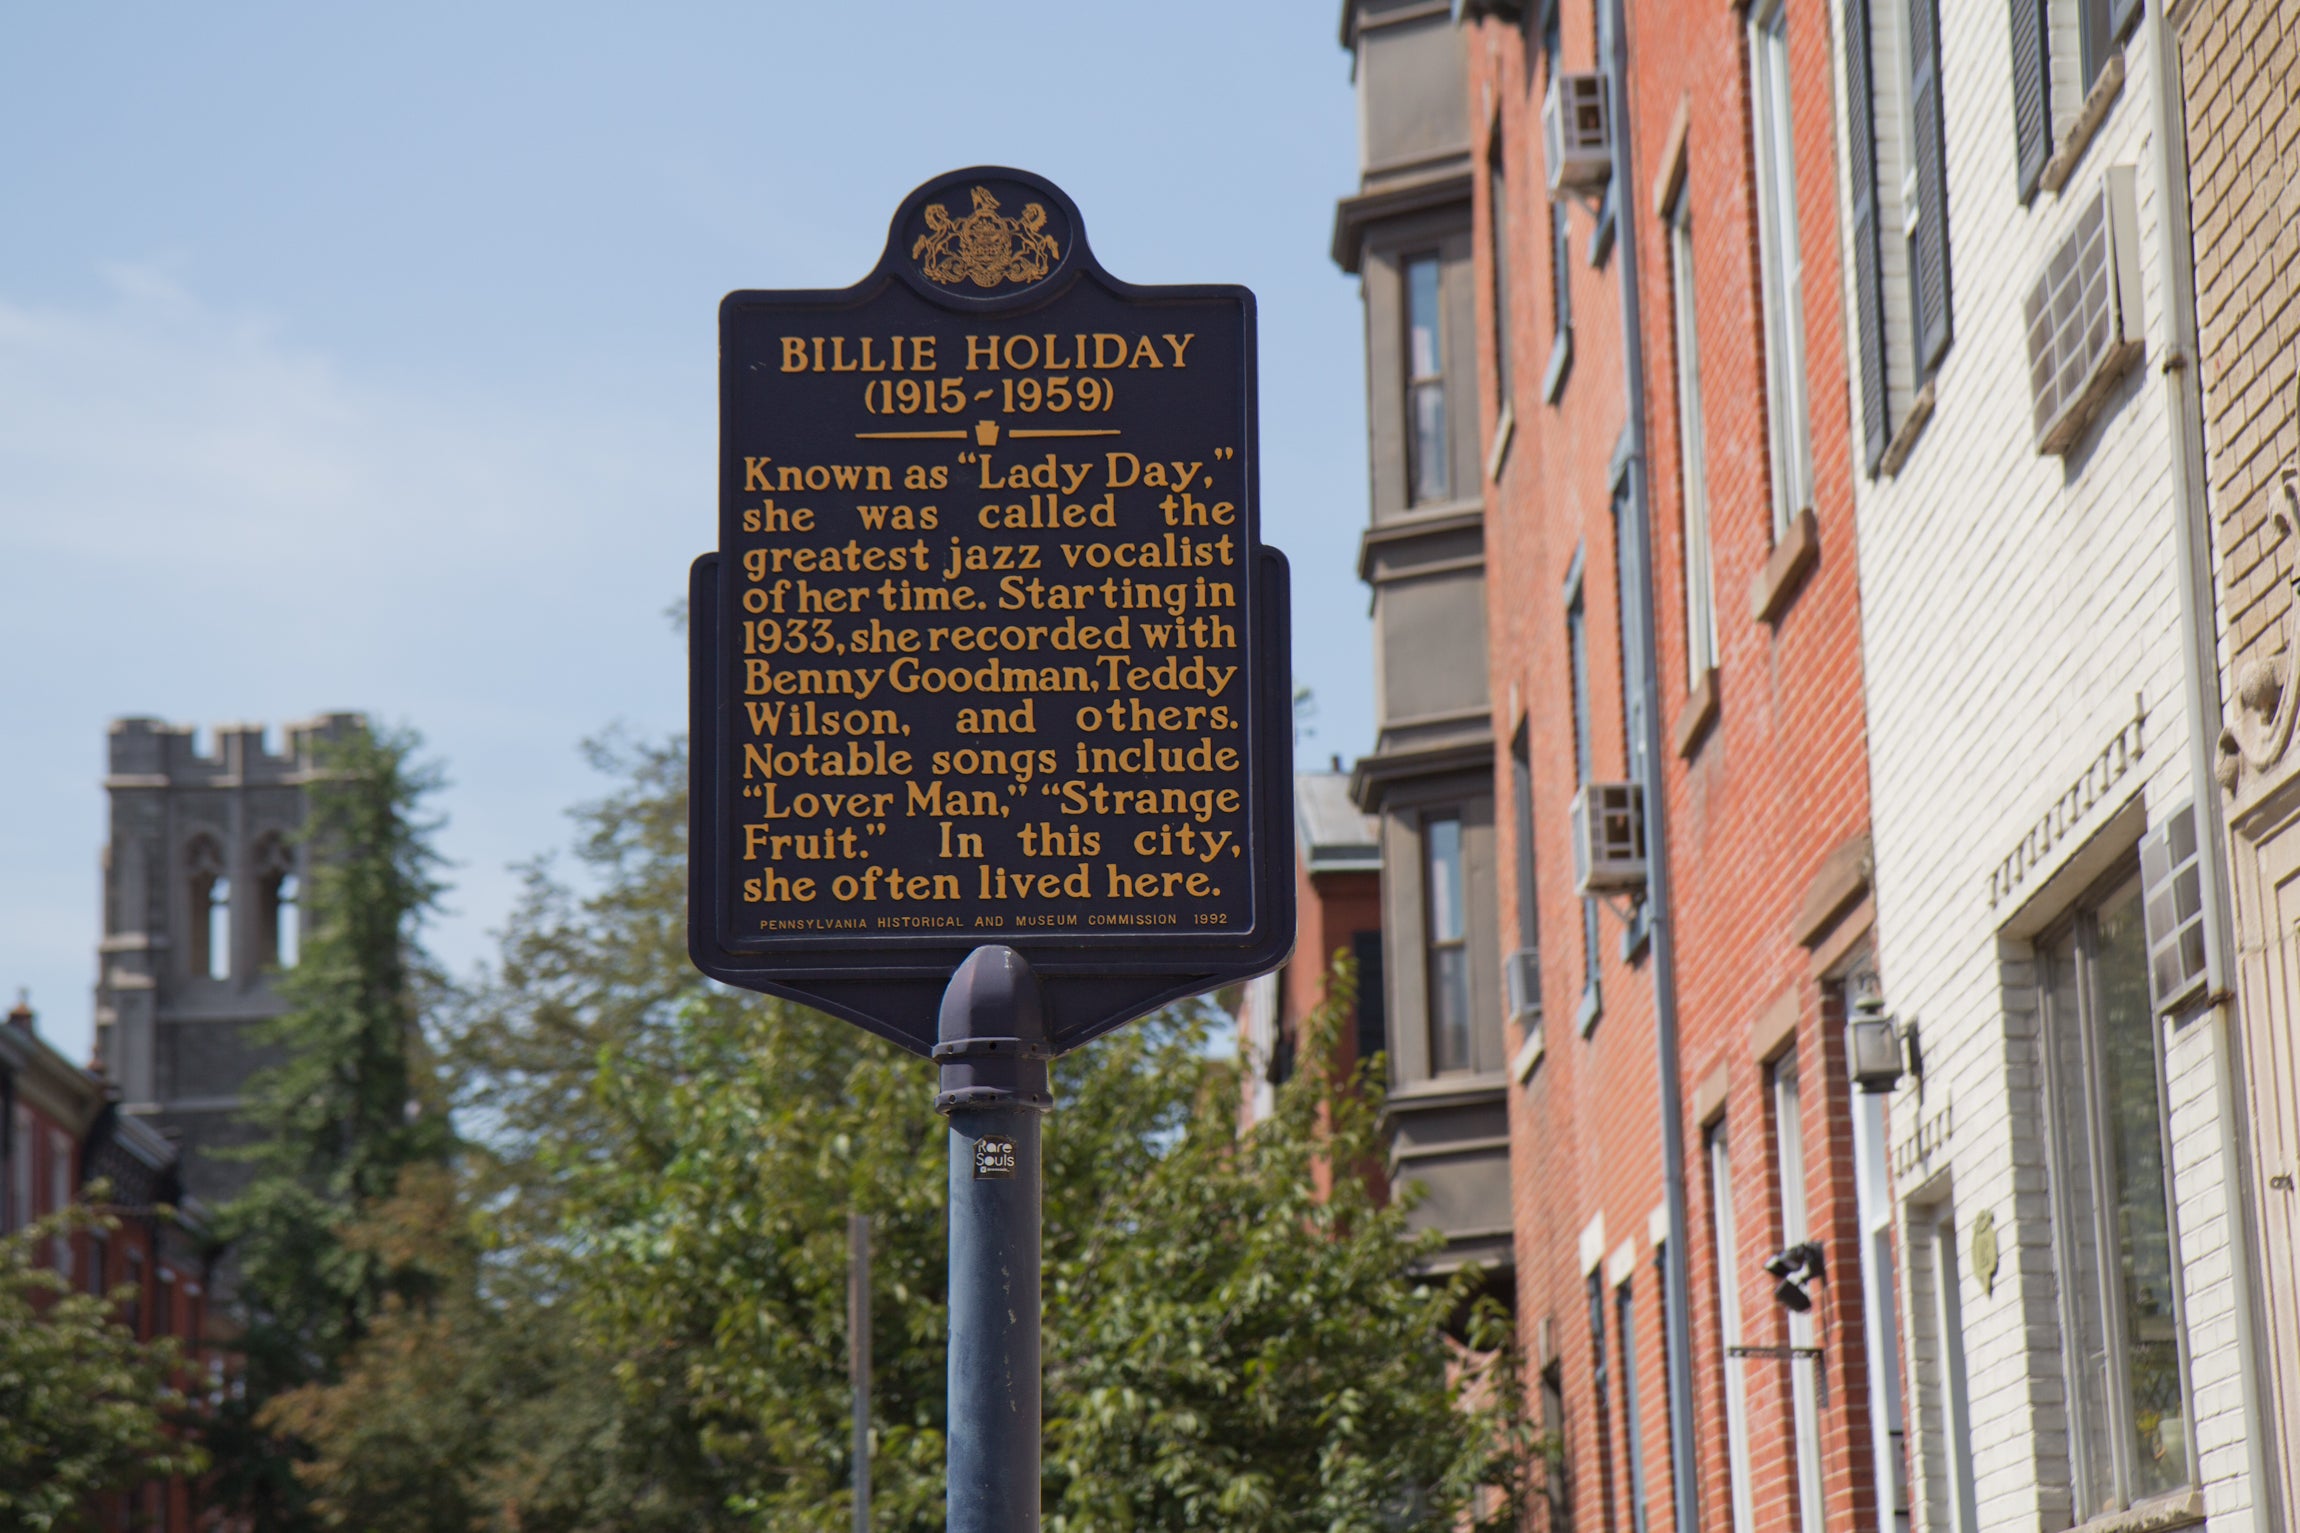 The Douglass Hotel was where Billie Holiday "often lived" when in Philadelphia. (Kimberly Paynter/WHYY)